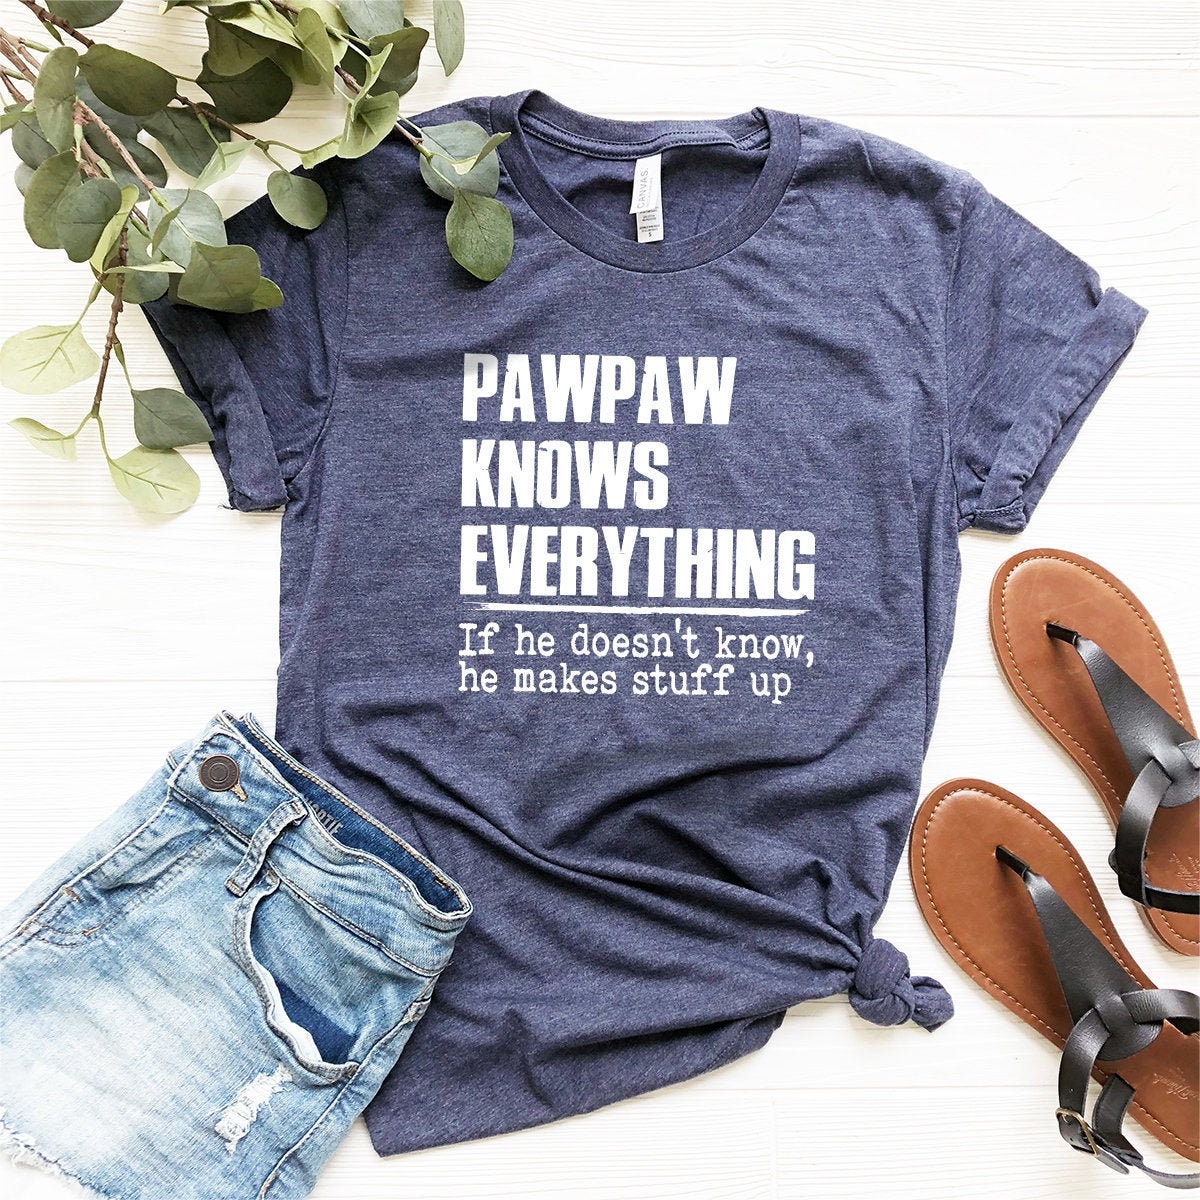 Funny Grandpa Shirt, Pawpaw T Shirt, Papaw Gift, Papa T Shirt, Grandfather Gifts, Grandpa T Shirt, Grandpa Gift, Papaw Knows Everything Tee - Fastdeliverytees.com